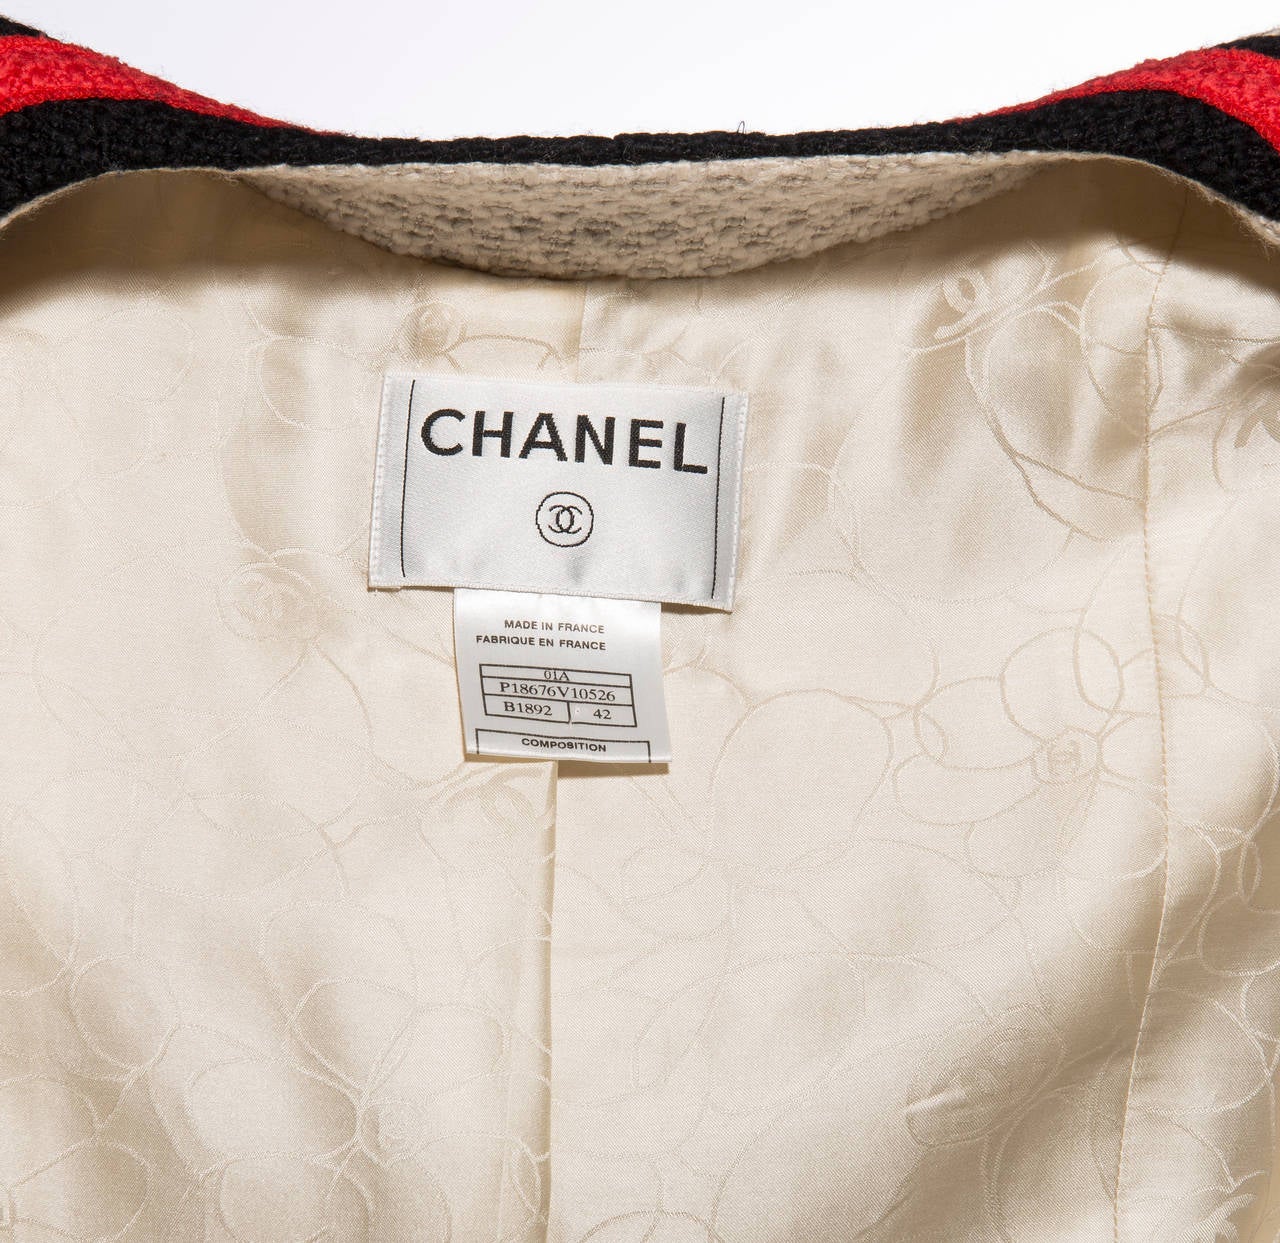 Chanel Skirt Suit Exhibited 